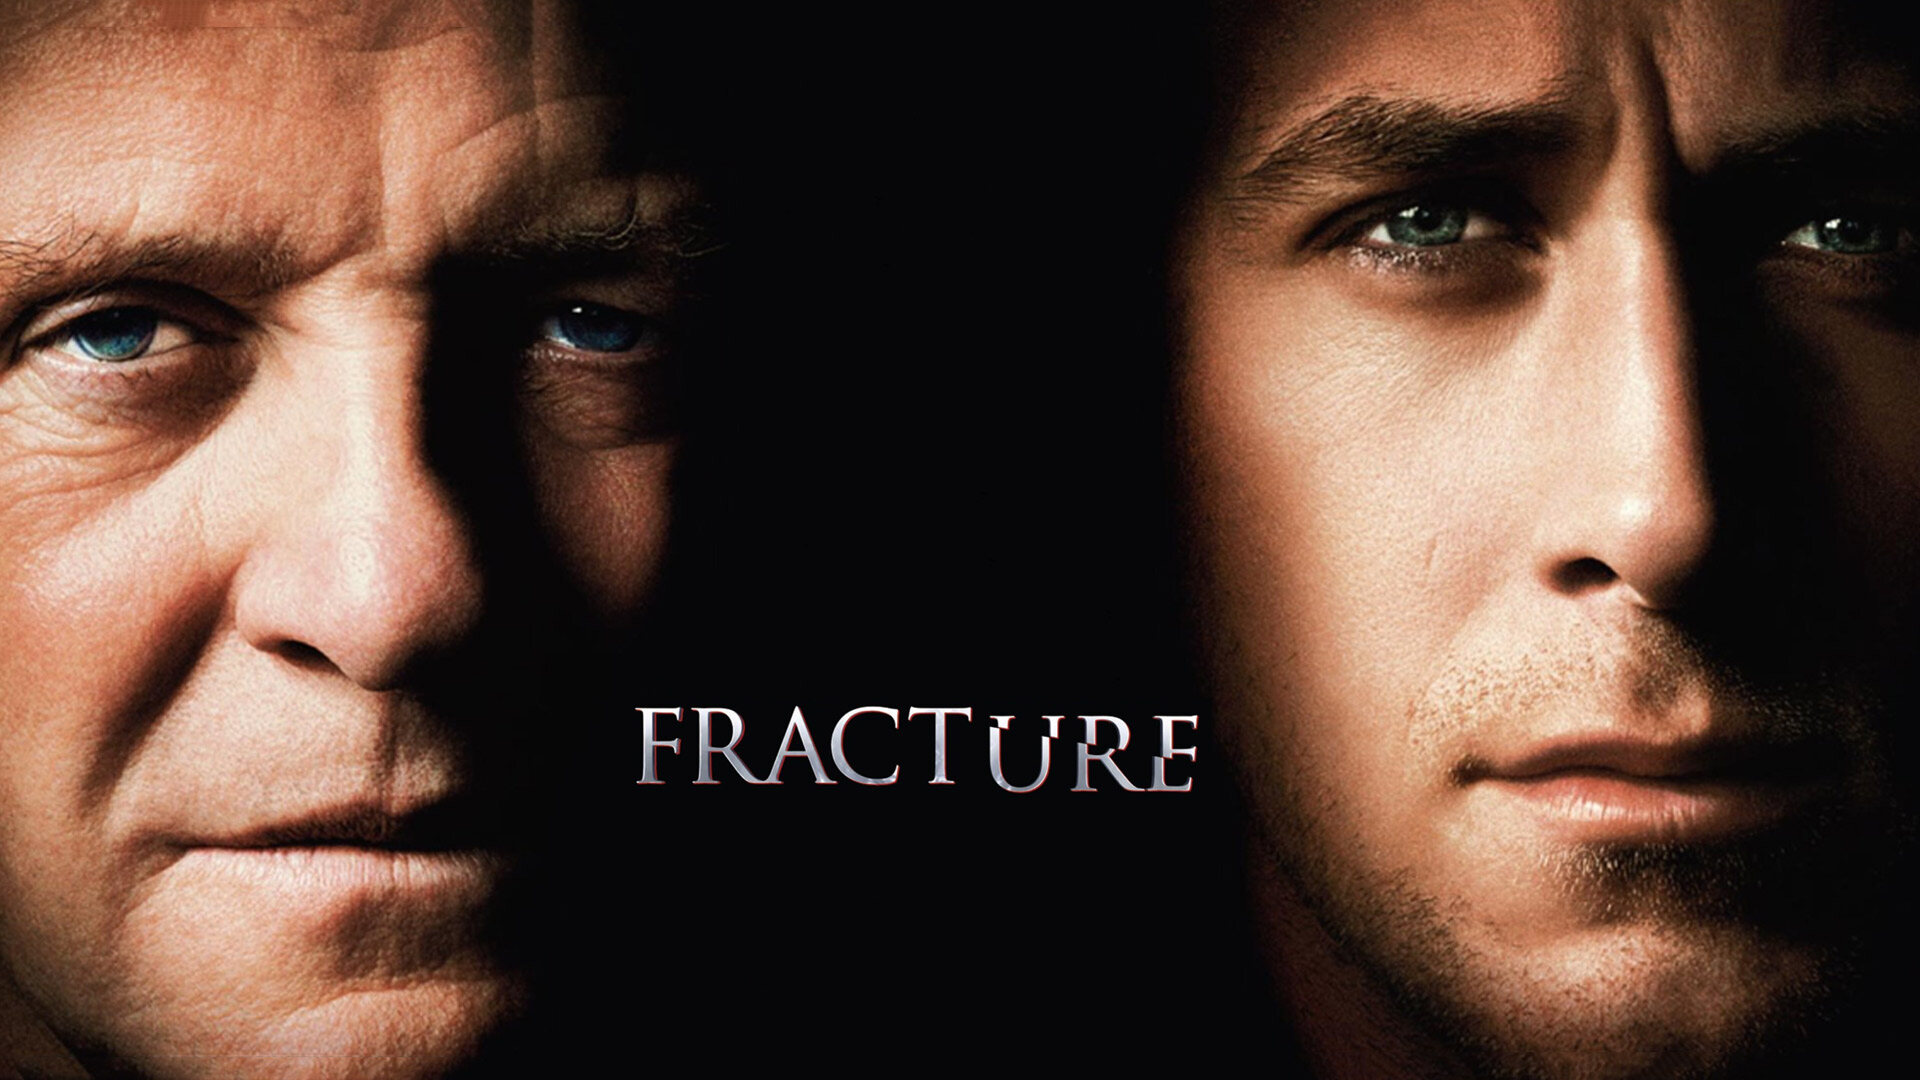 37-facts-about-the-movie-fracture